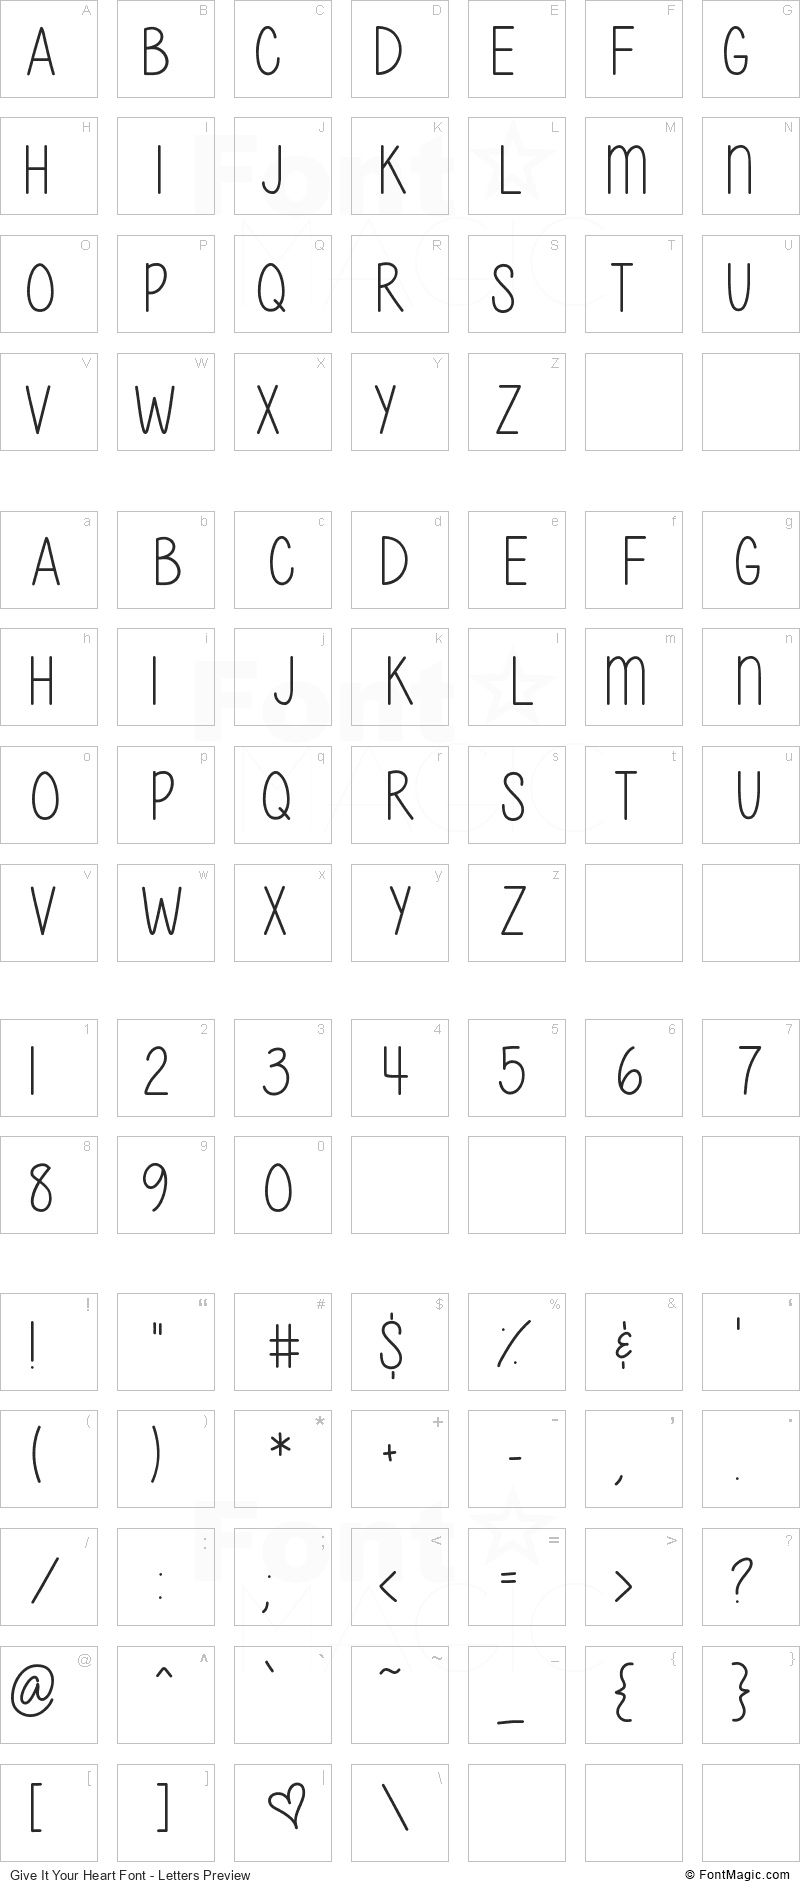 Give It Your Heart Font - All Latters Preview Chart